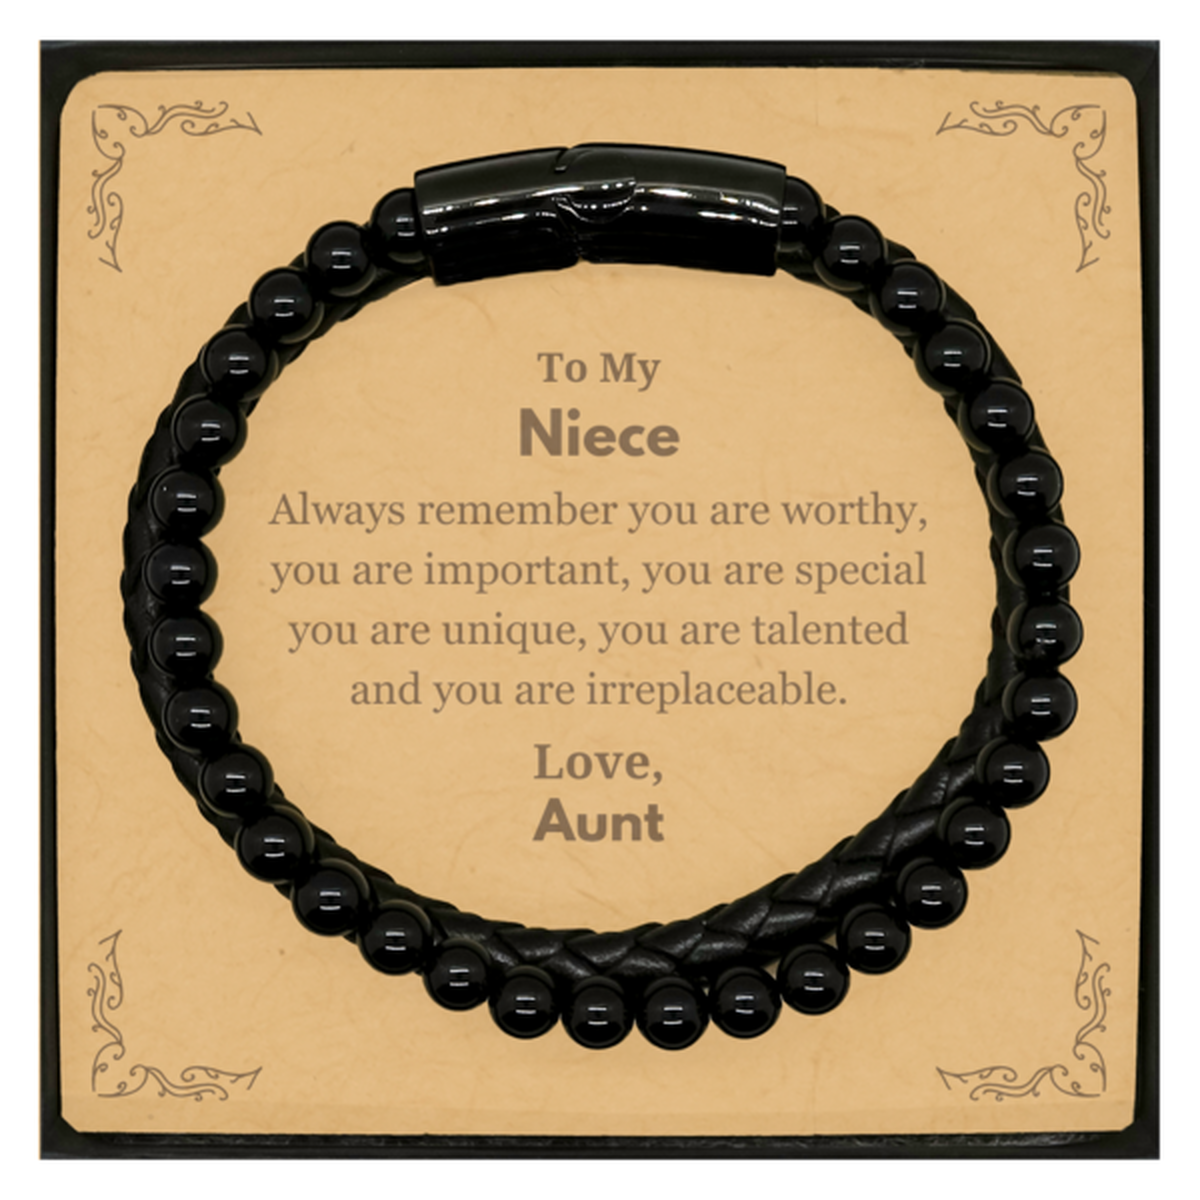 Niece Birthday Gifts from Aunt, Inspirational Stone Leather Bracelets for Niece Christmas Graduation Gifts for Niece Always remember you are worthy, you are important. Love, Aunt